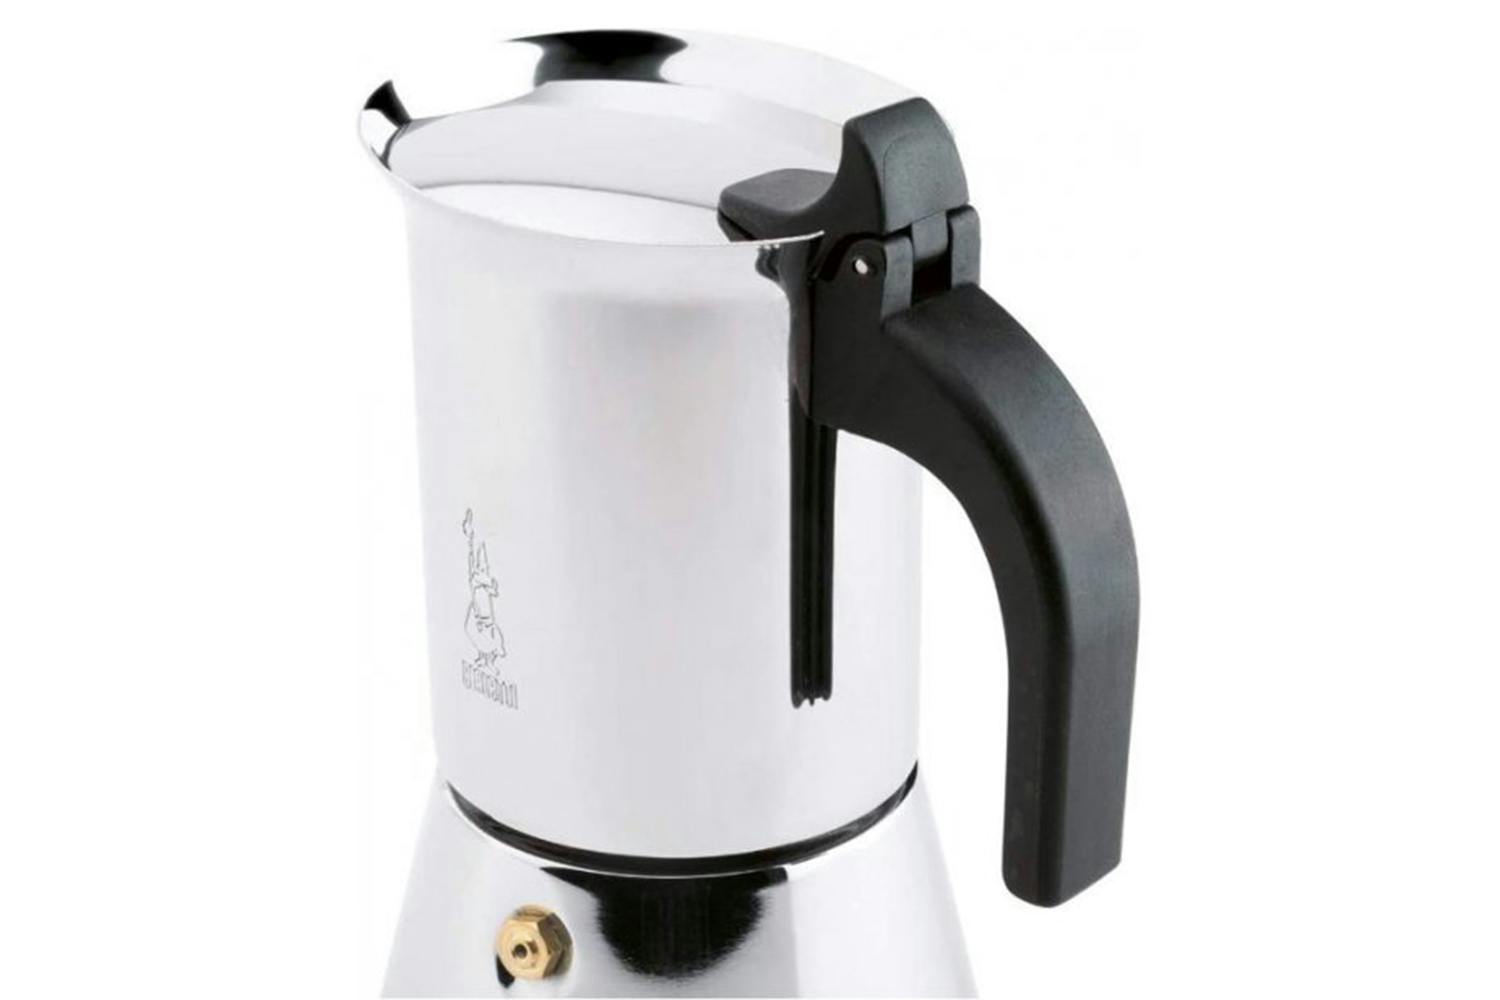 Bialetti - Musa, Stovetop Coffee Maker, Suitable for all Types of Hobs,  Stainless Steel, 6 Cups, Silver